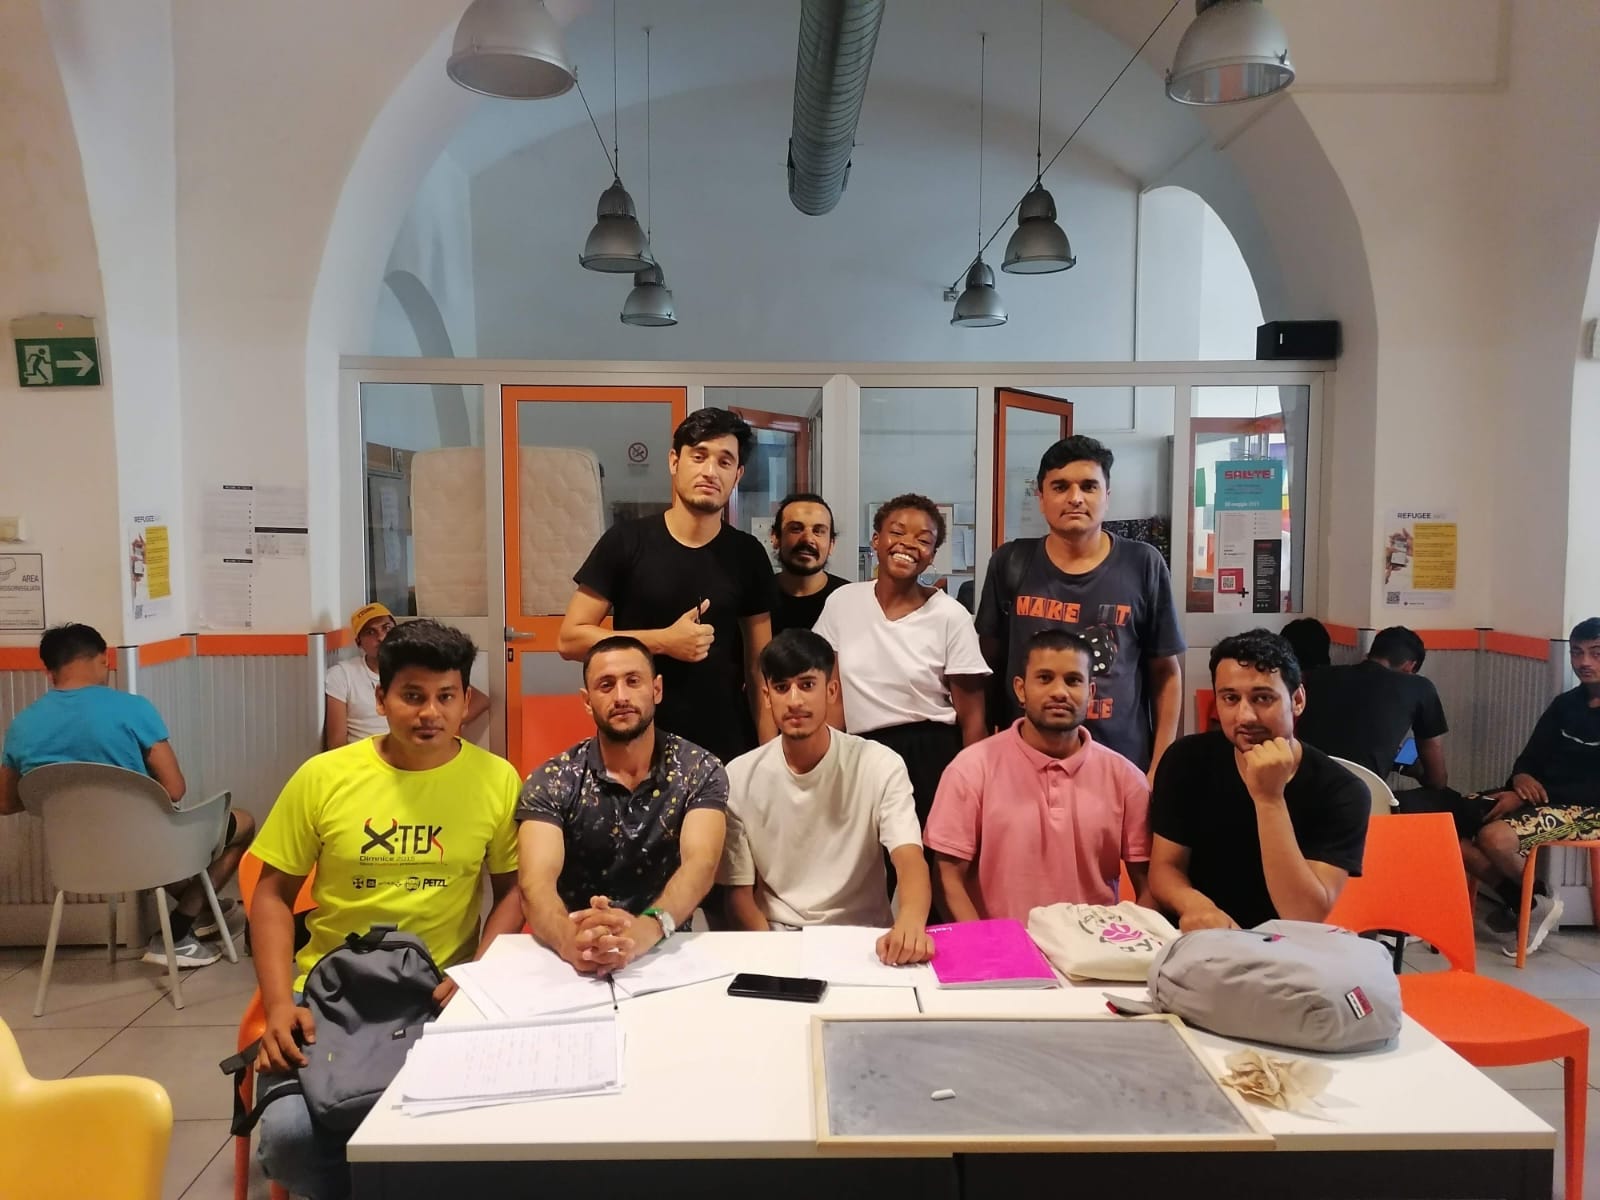 The Value of Volunteering: My Teaching Experience With Balkan Route Migrants